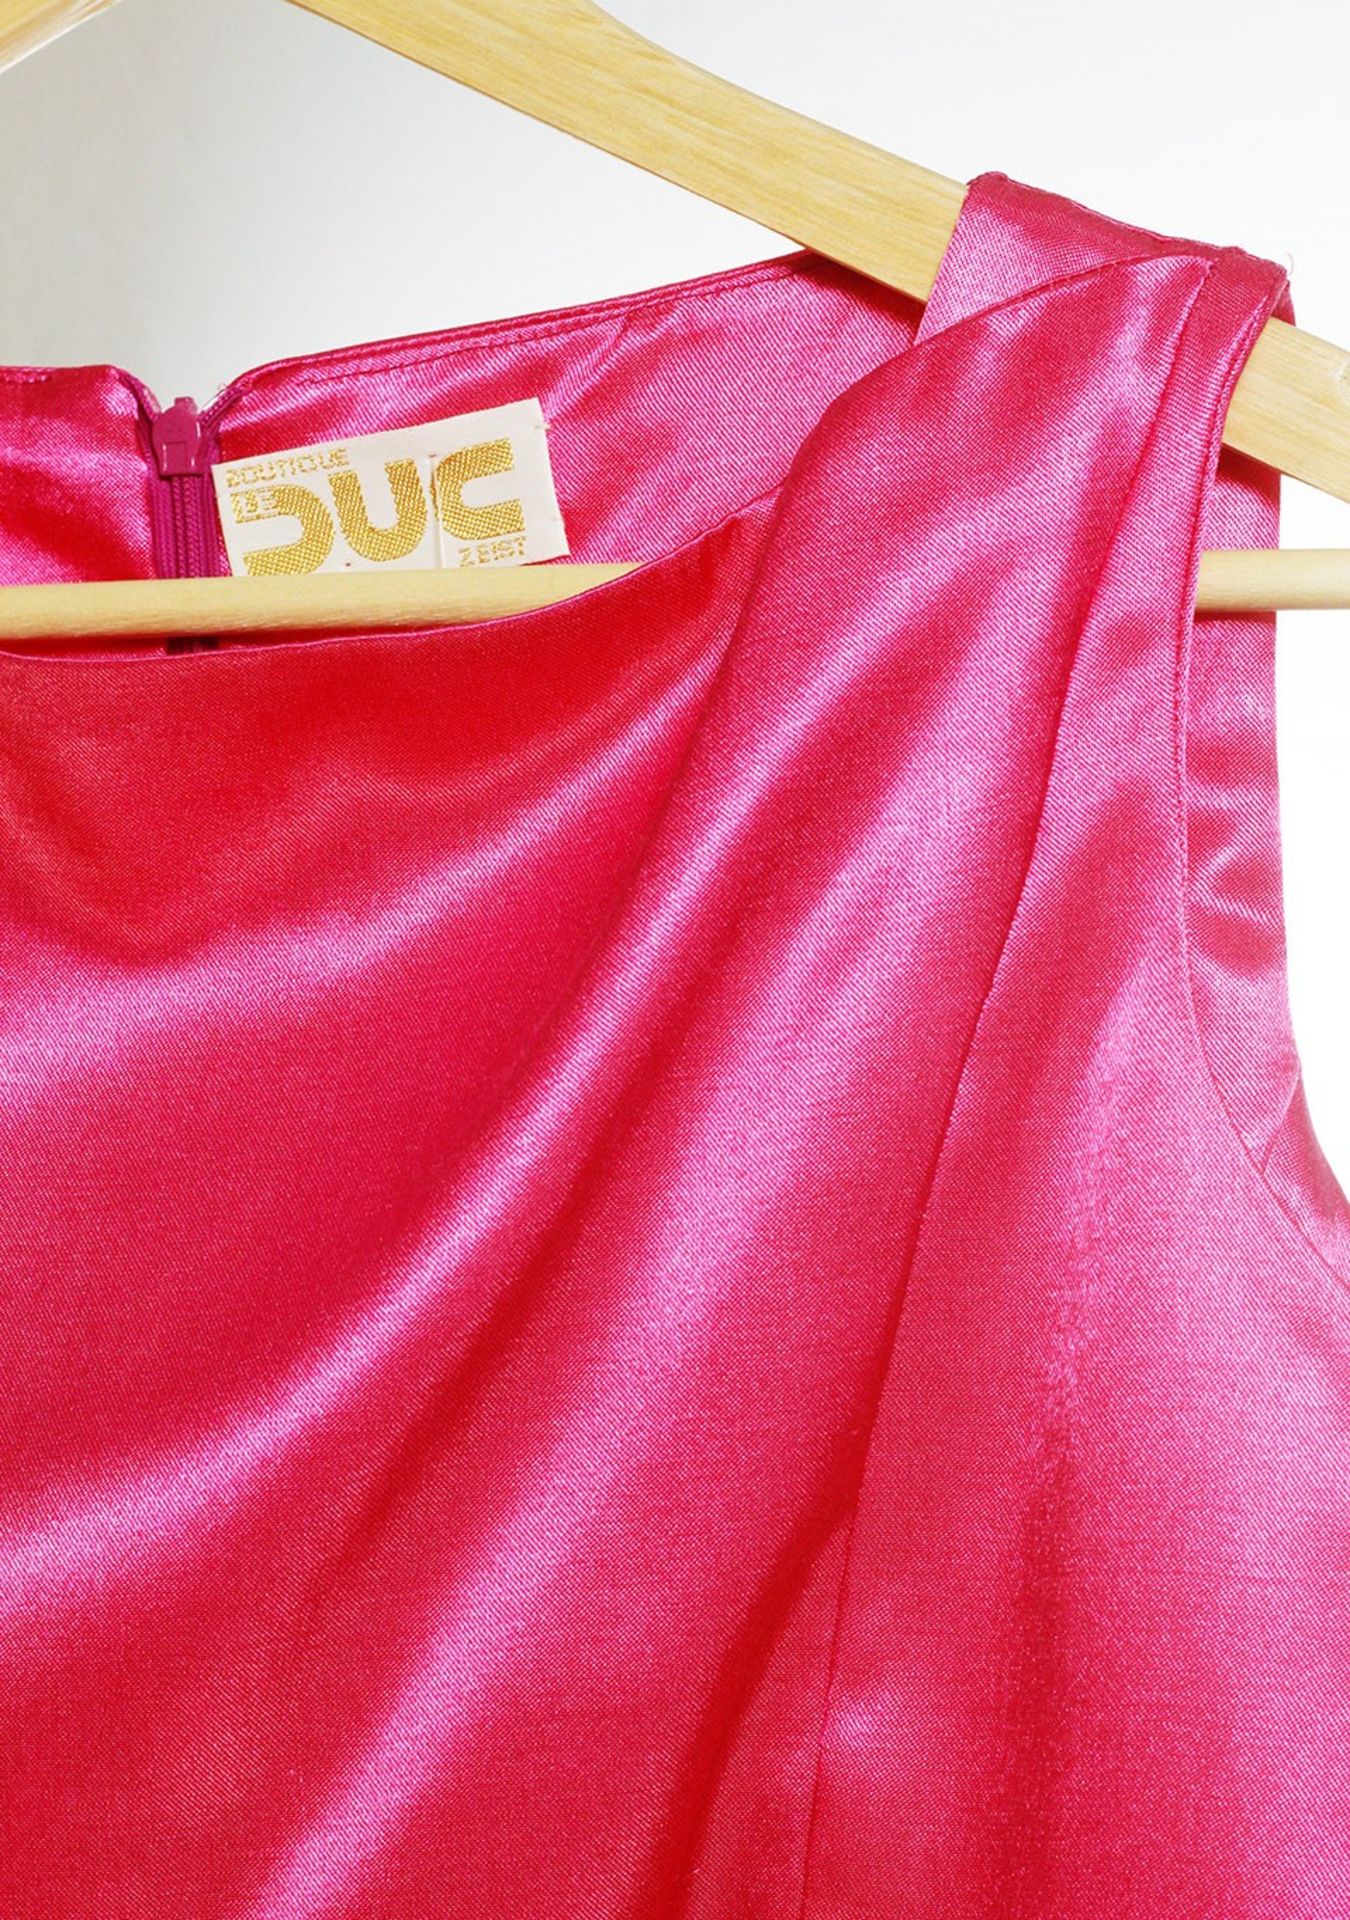 1 x Boutique Le Duc Fuschia Vest - From a High End Clothing Boutique In The - Image 9 of 10